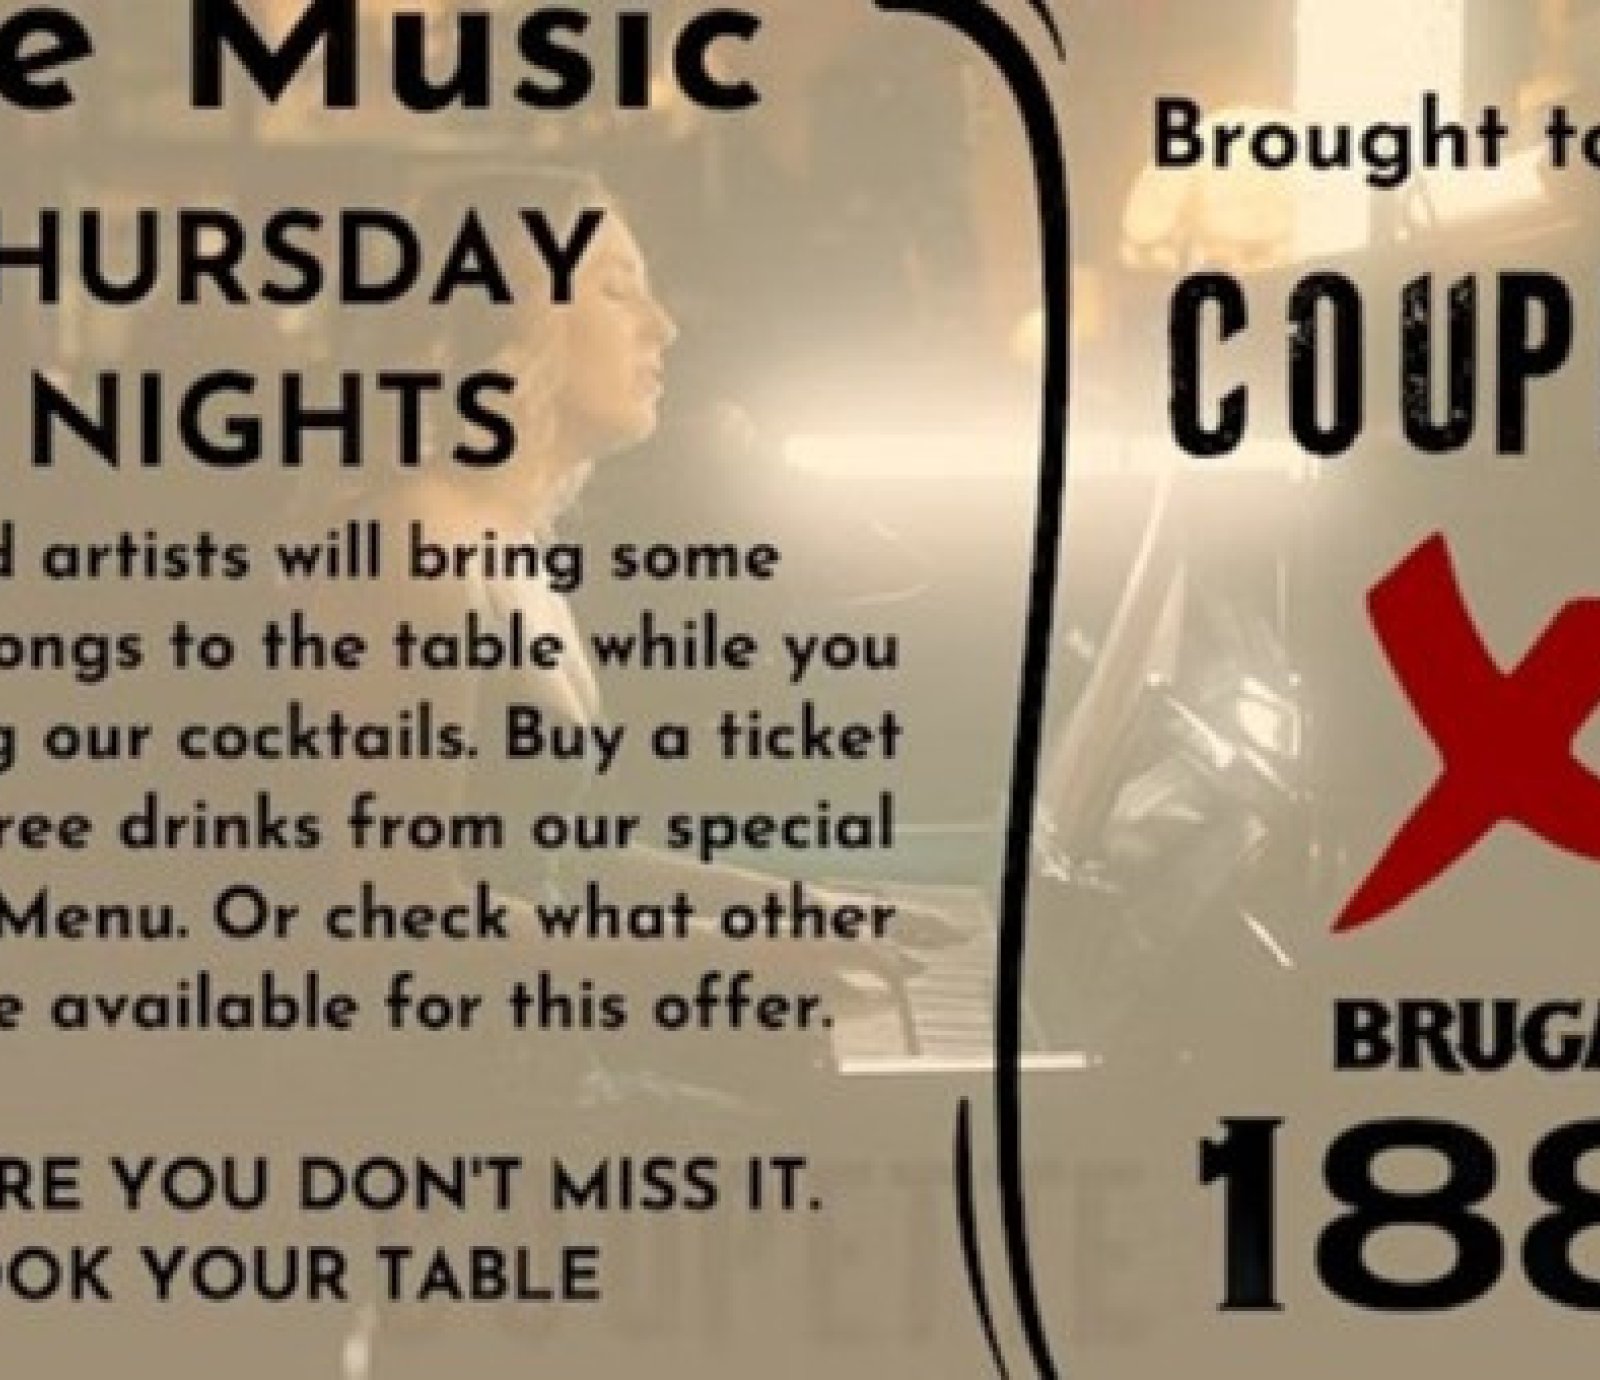 Live Music Voucher with Brugal 1888